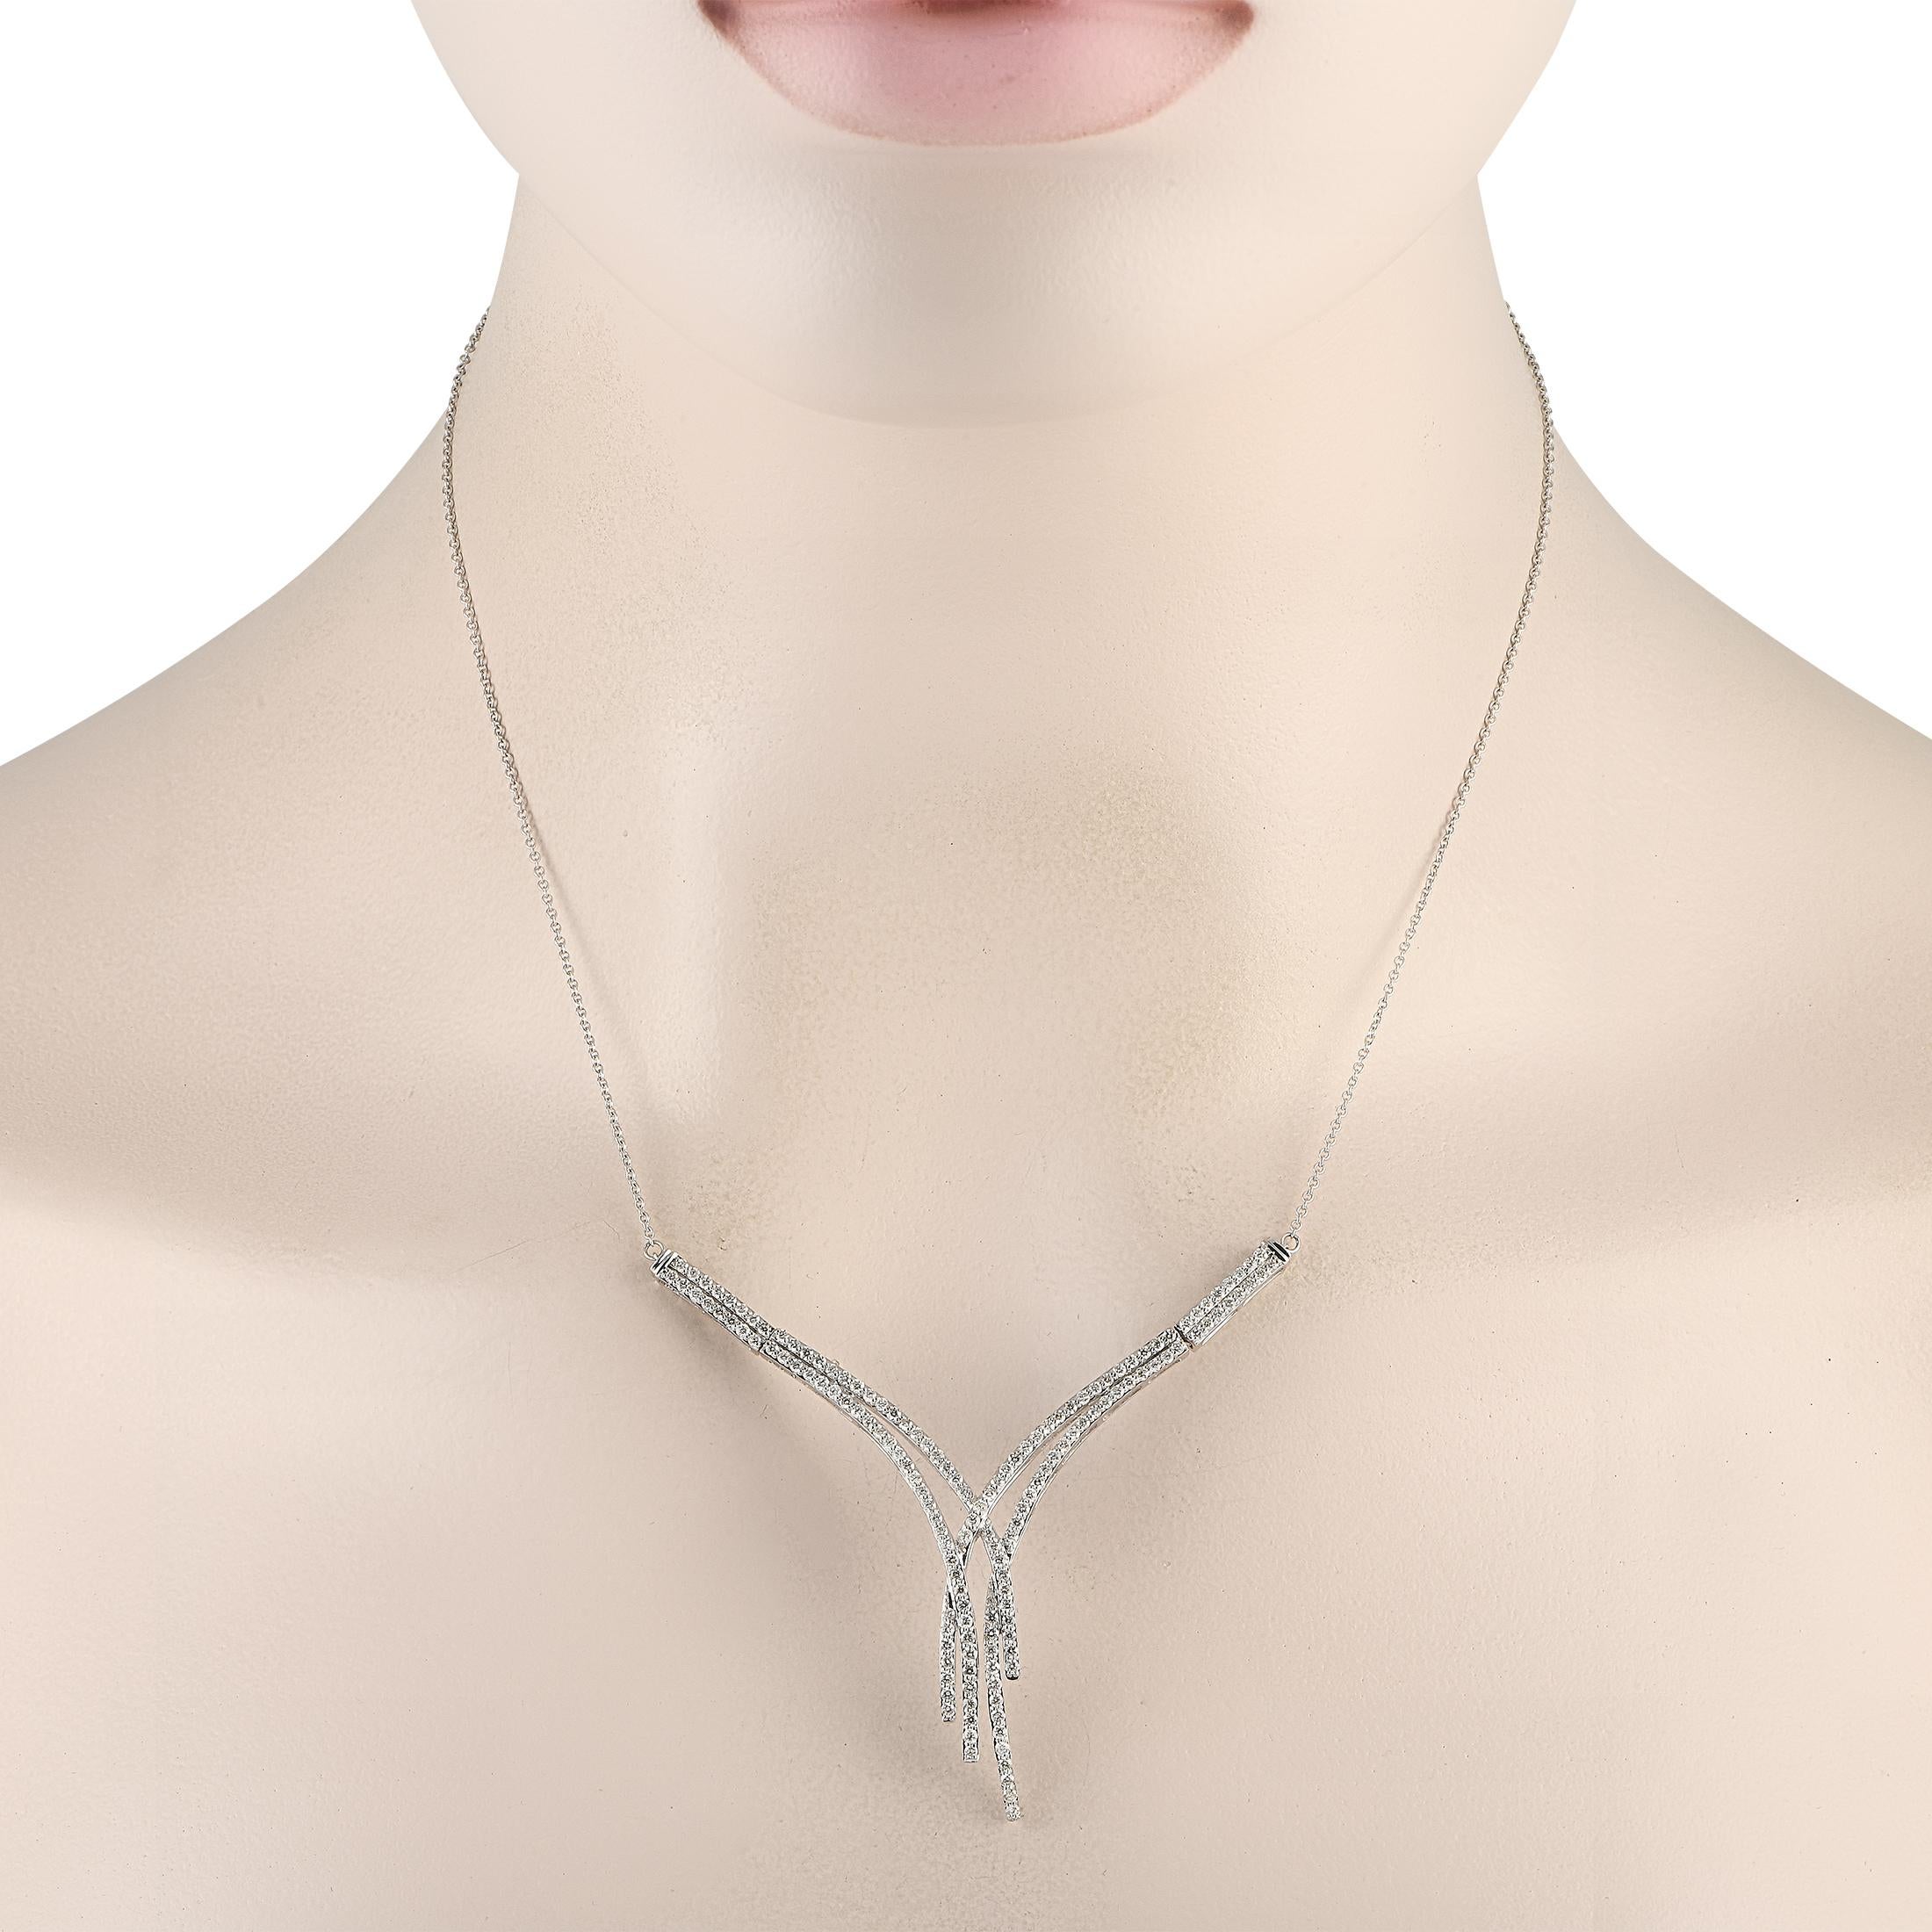 Shimmering strands of Diamonds with a total weight of 1.50 carats make a statement at the center of a 16 chain on this captivating luxury necklace. Crafted from 14K White Gold, this pieces pendant measures 2.50 long by 2.50 wide.This jewelry piece